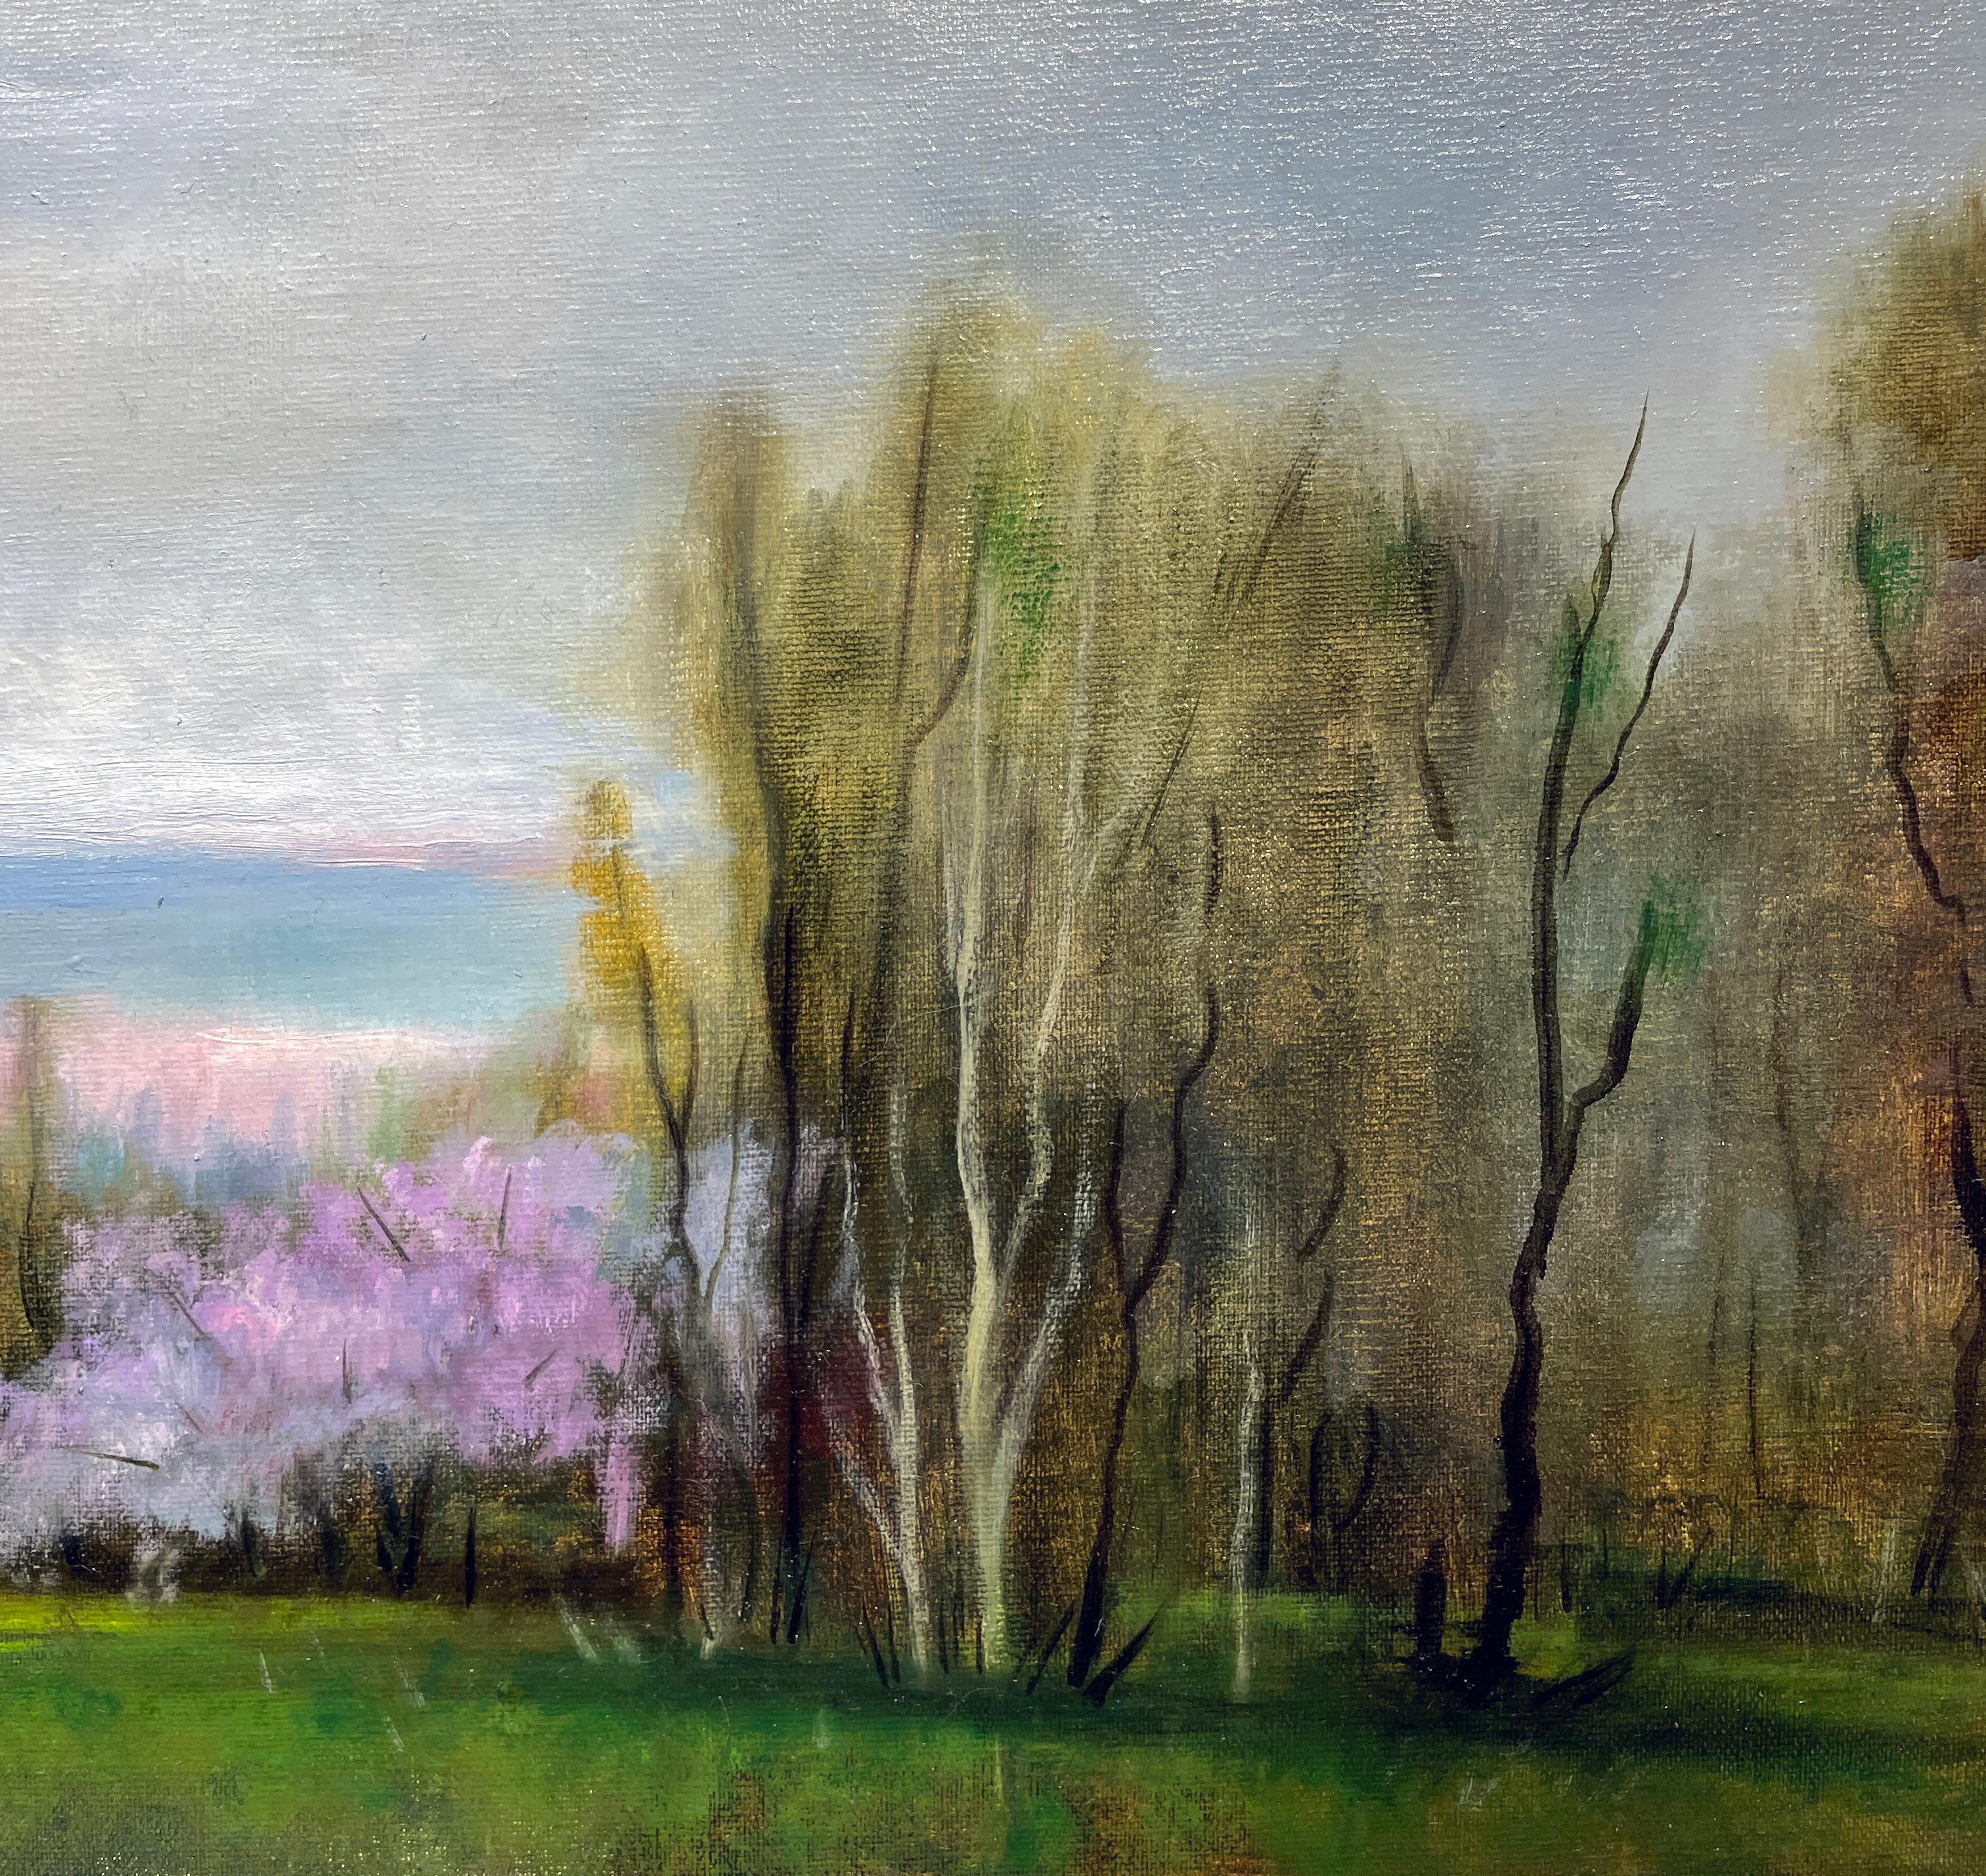 Cloud Cover - Early Spring Landscape with Pastel Flowering Trees, Original Oil  1